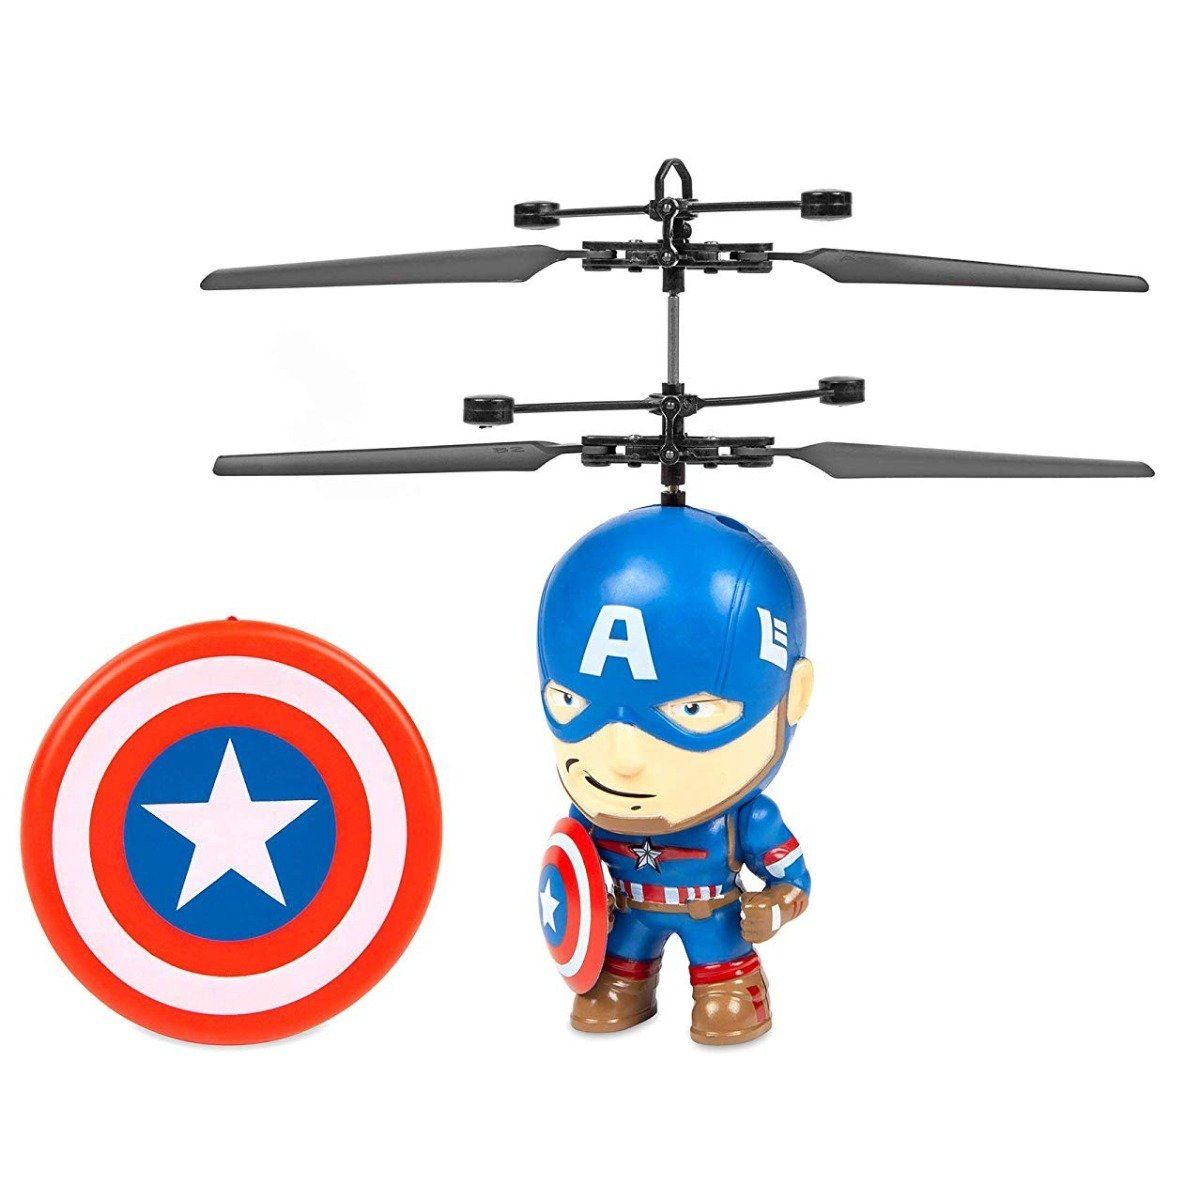 Marvel Licensed 3.5 Inch Flying Figure IR UFO Big Head Helicopter / Captain America